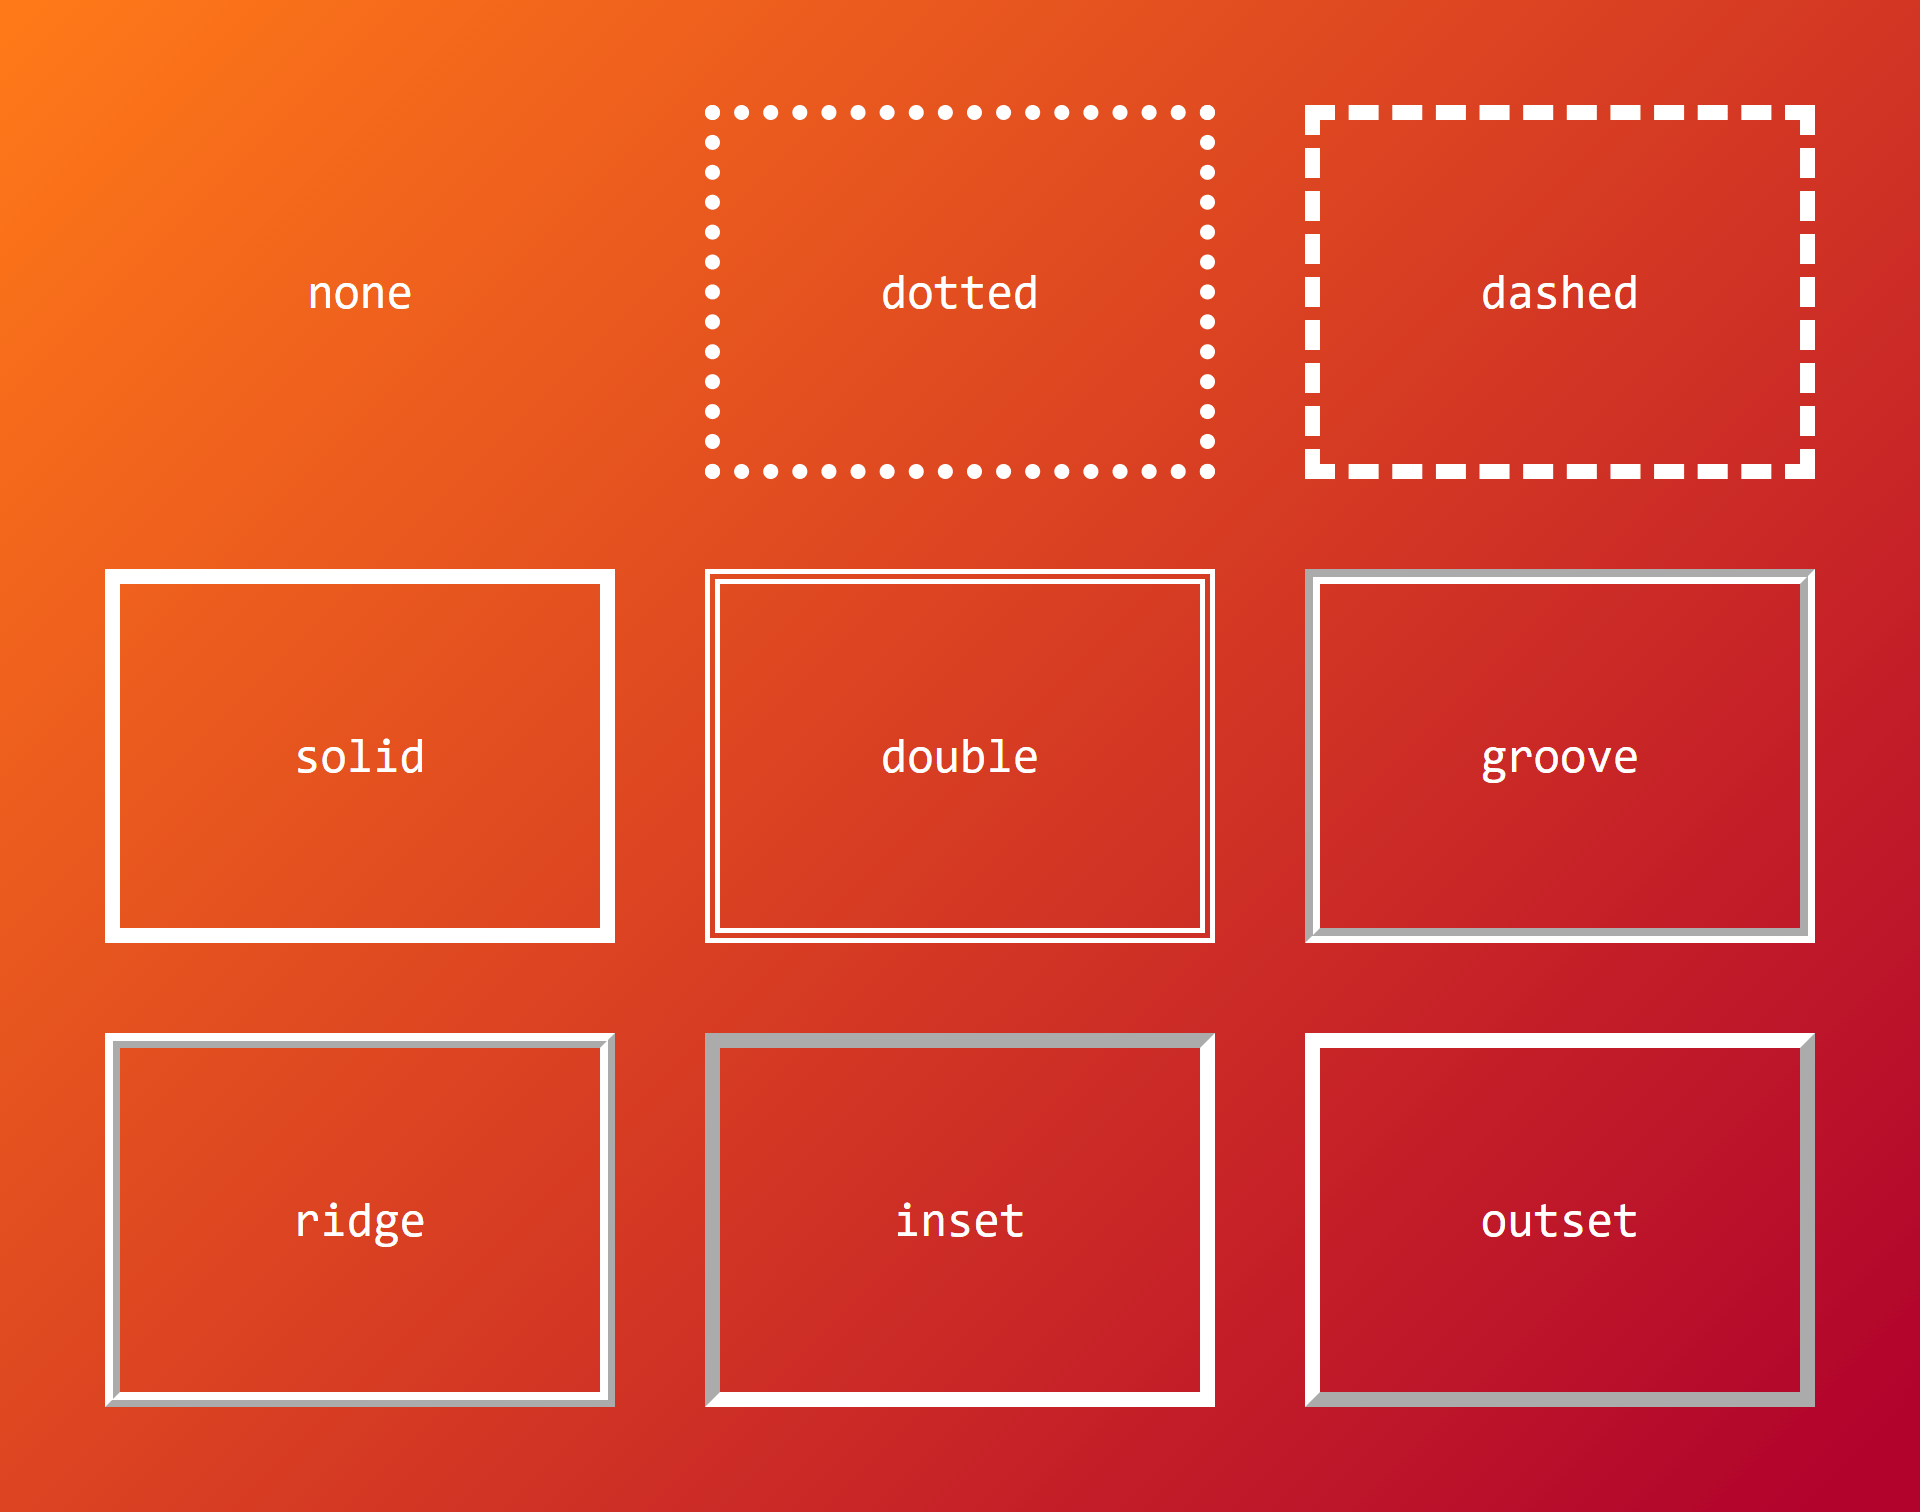 A three-by-three grid of boxes that are evenly spaced in white against a gradient that goes from bright orange to dark orange. Each box demonstrates an outline-style property value.